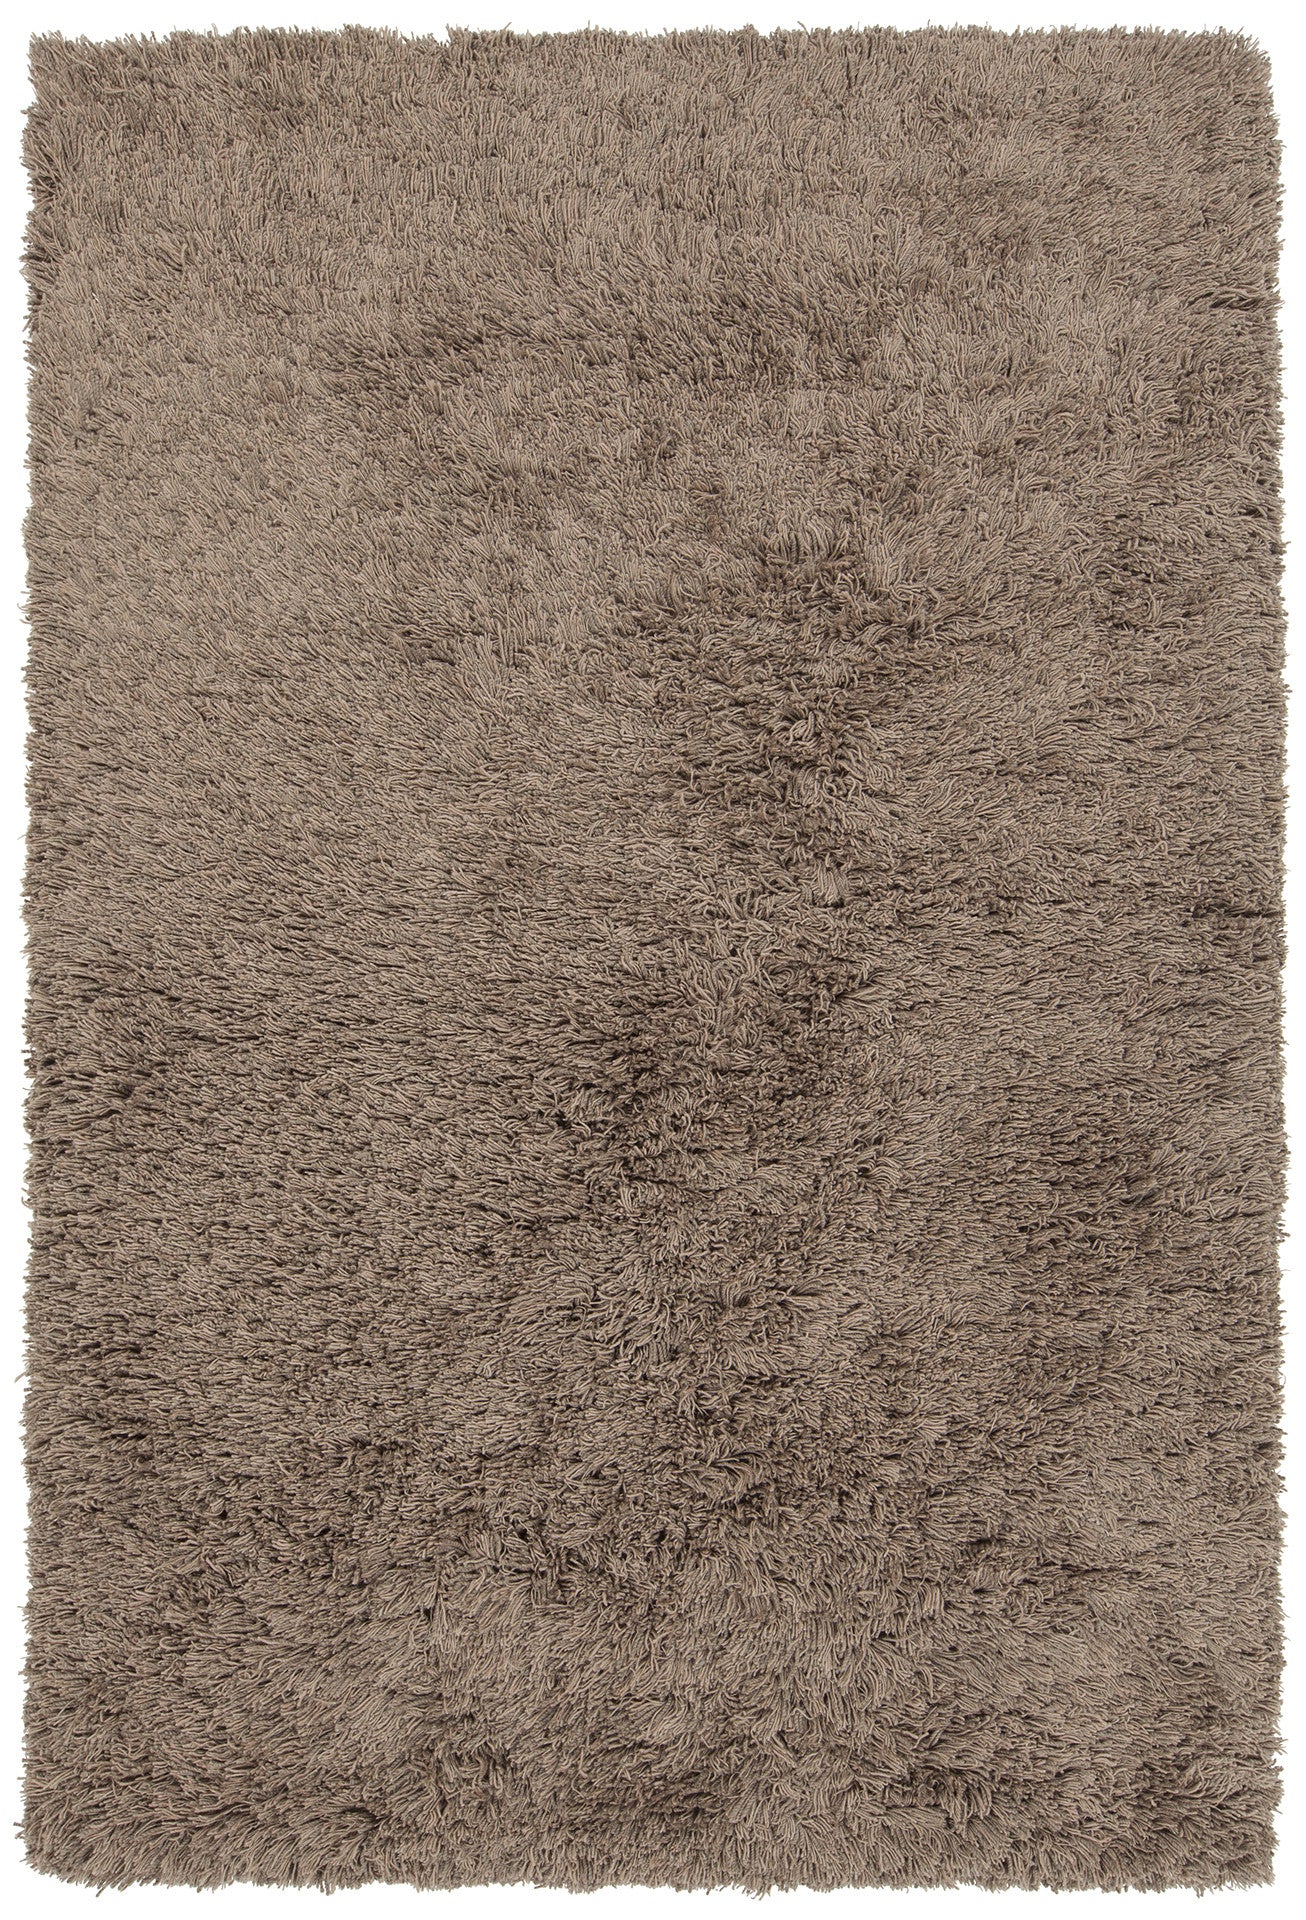 Chandra Noely NOE-43203 Taupe Area Rug main image